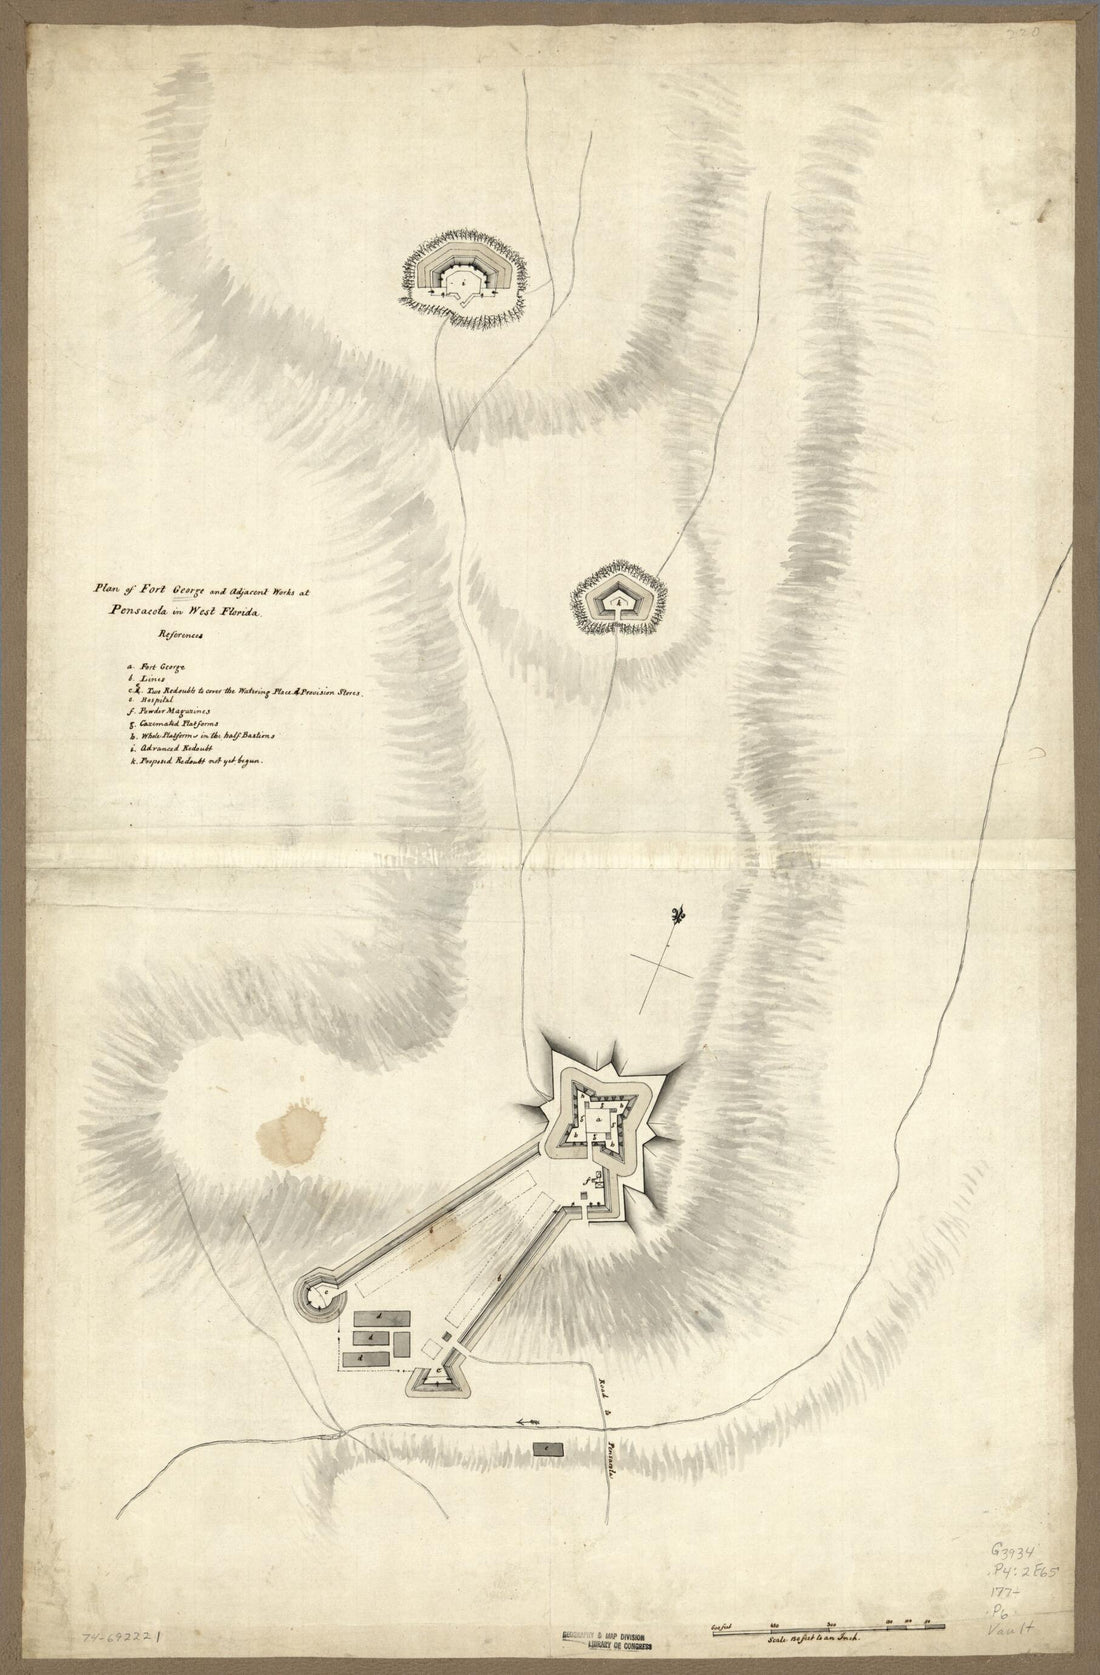 This old map of Plan of Fort George and Adjacent Works at Pensacola In West Florida from 1770 was created by  in 1770